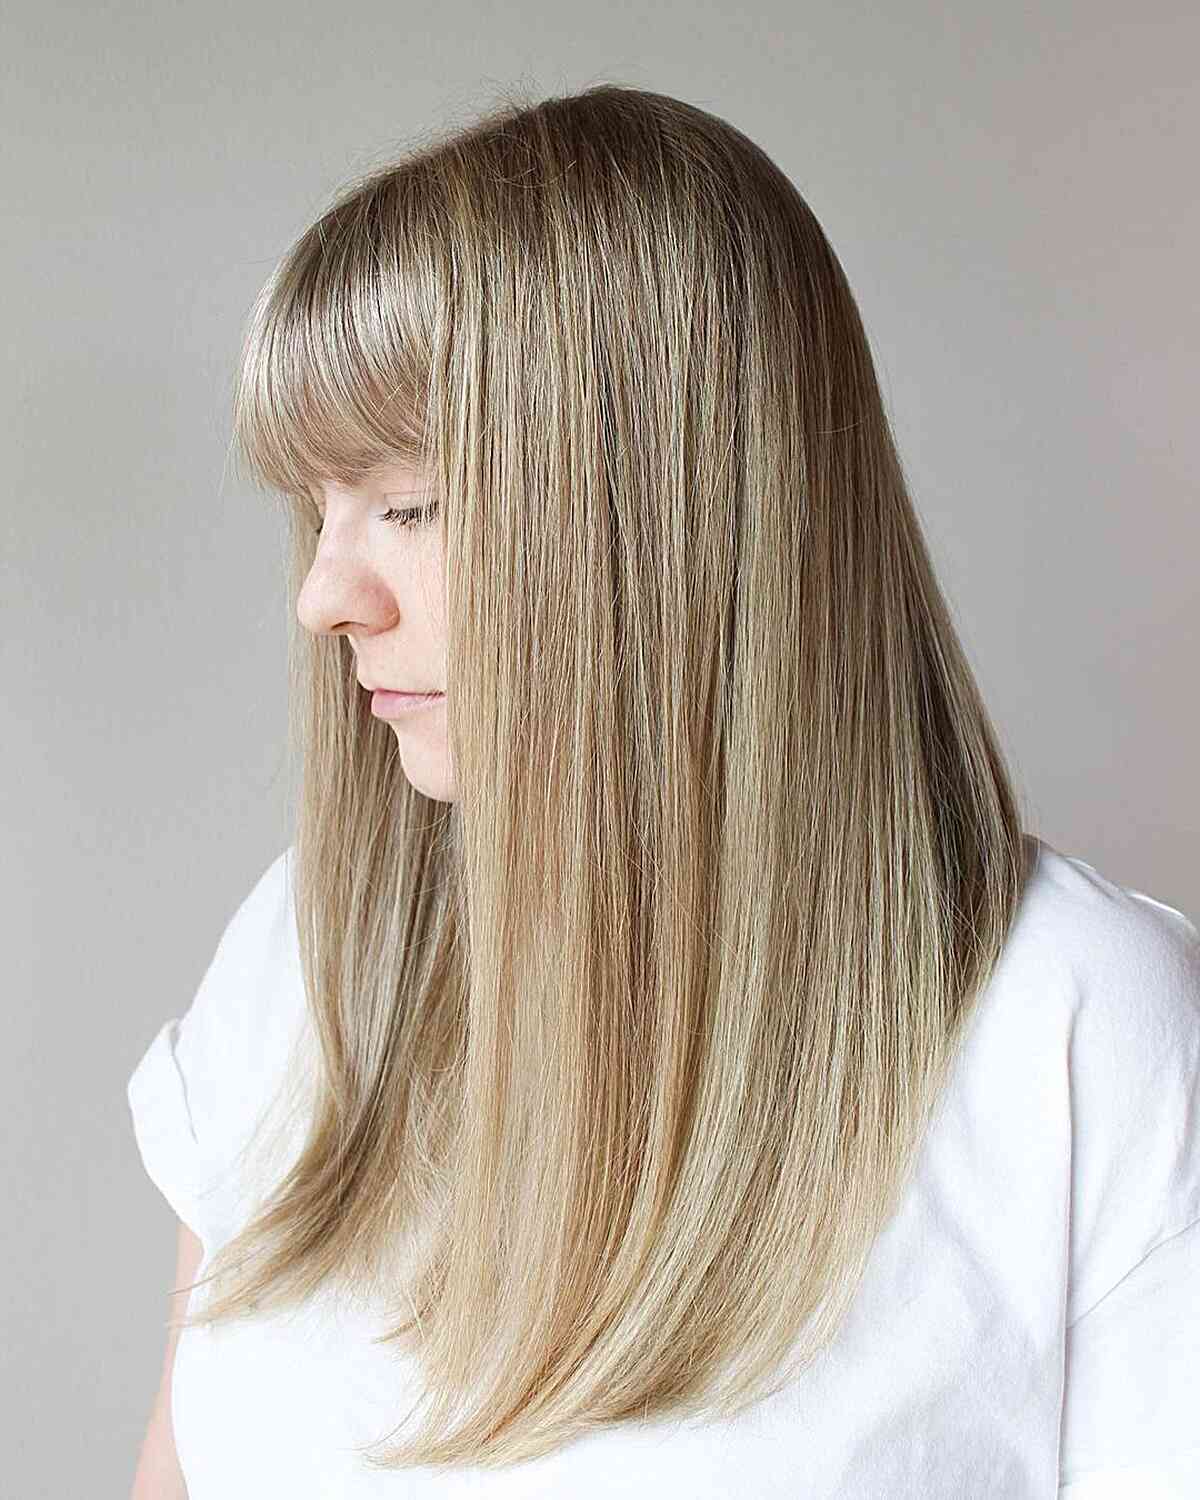 Chest-Length Straight Blonde Balayage Hair with Bangs and Shadow Root